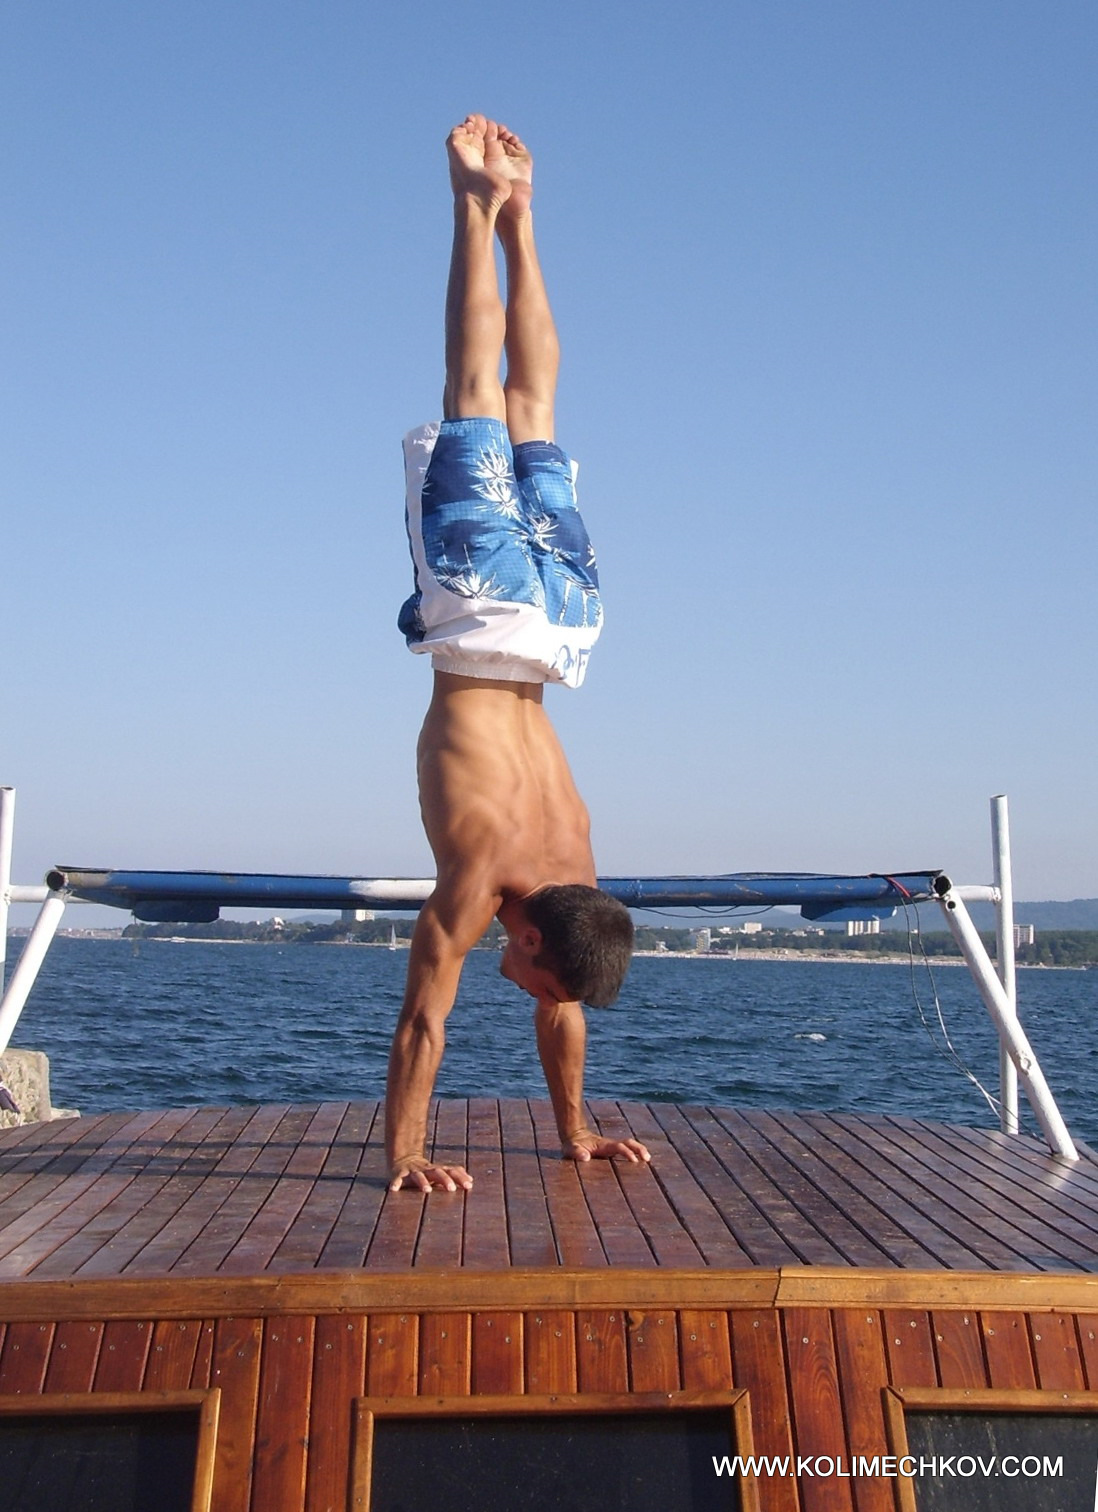 Handstand on the top of a boat